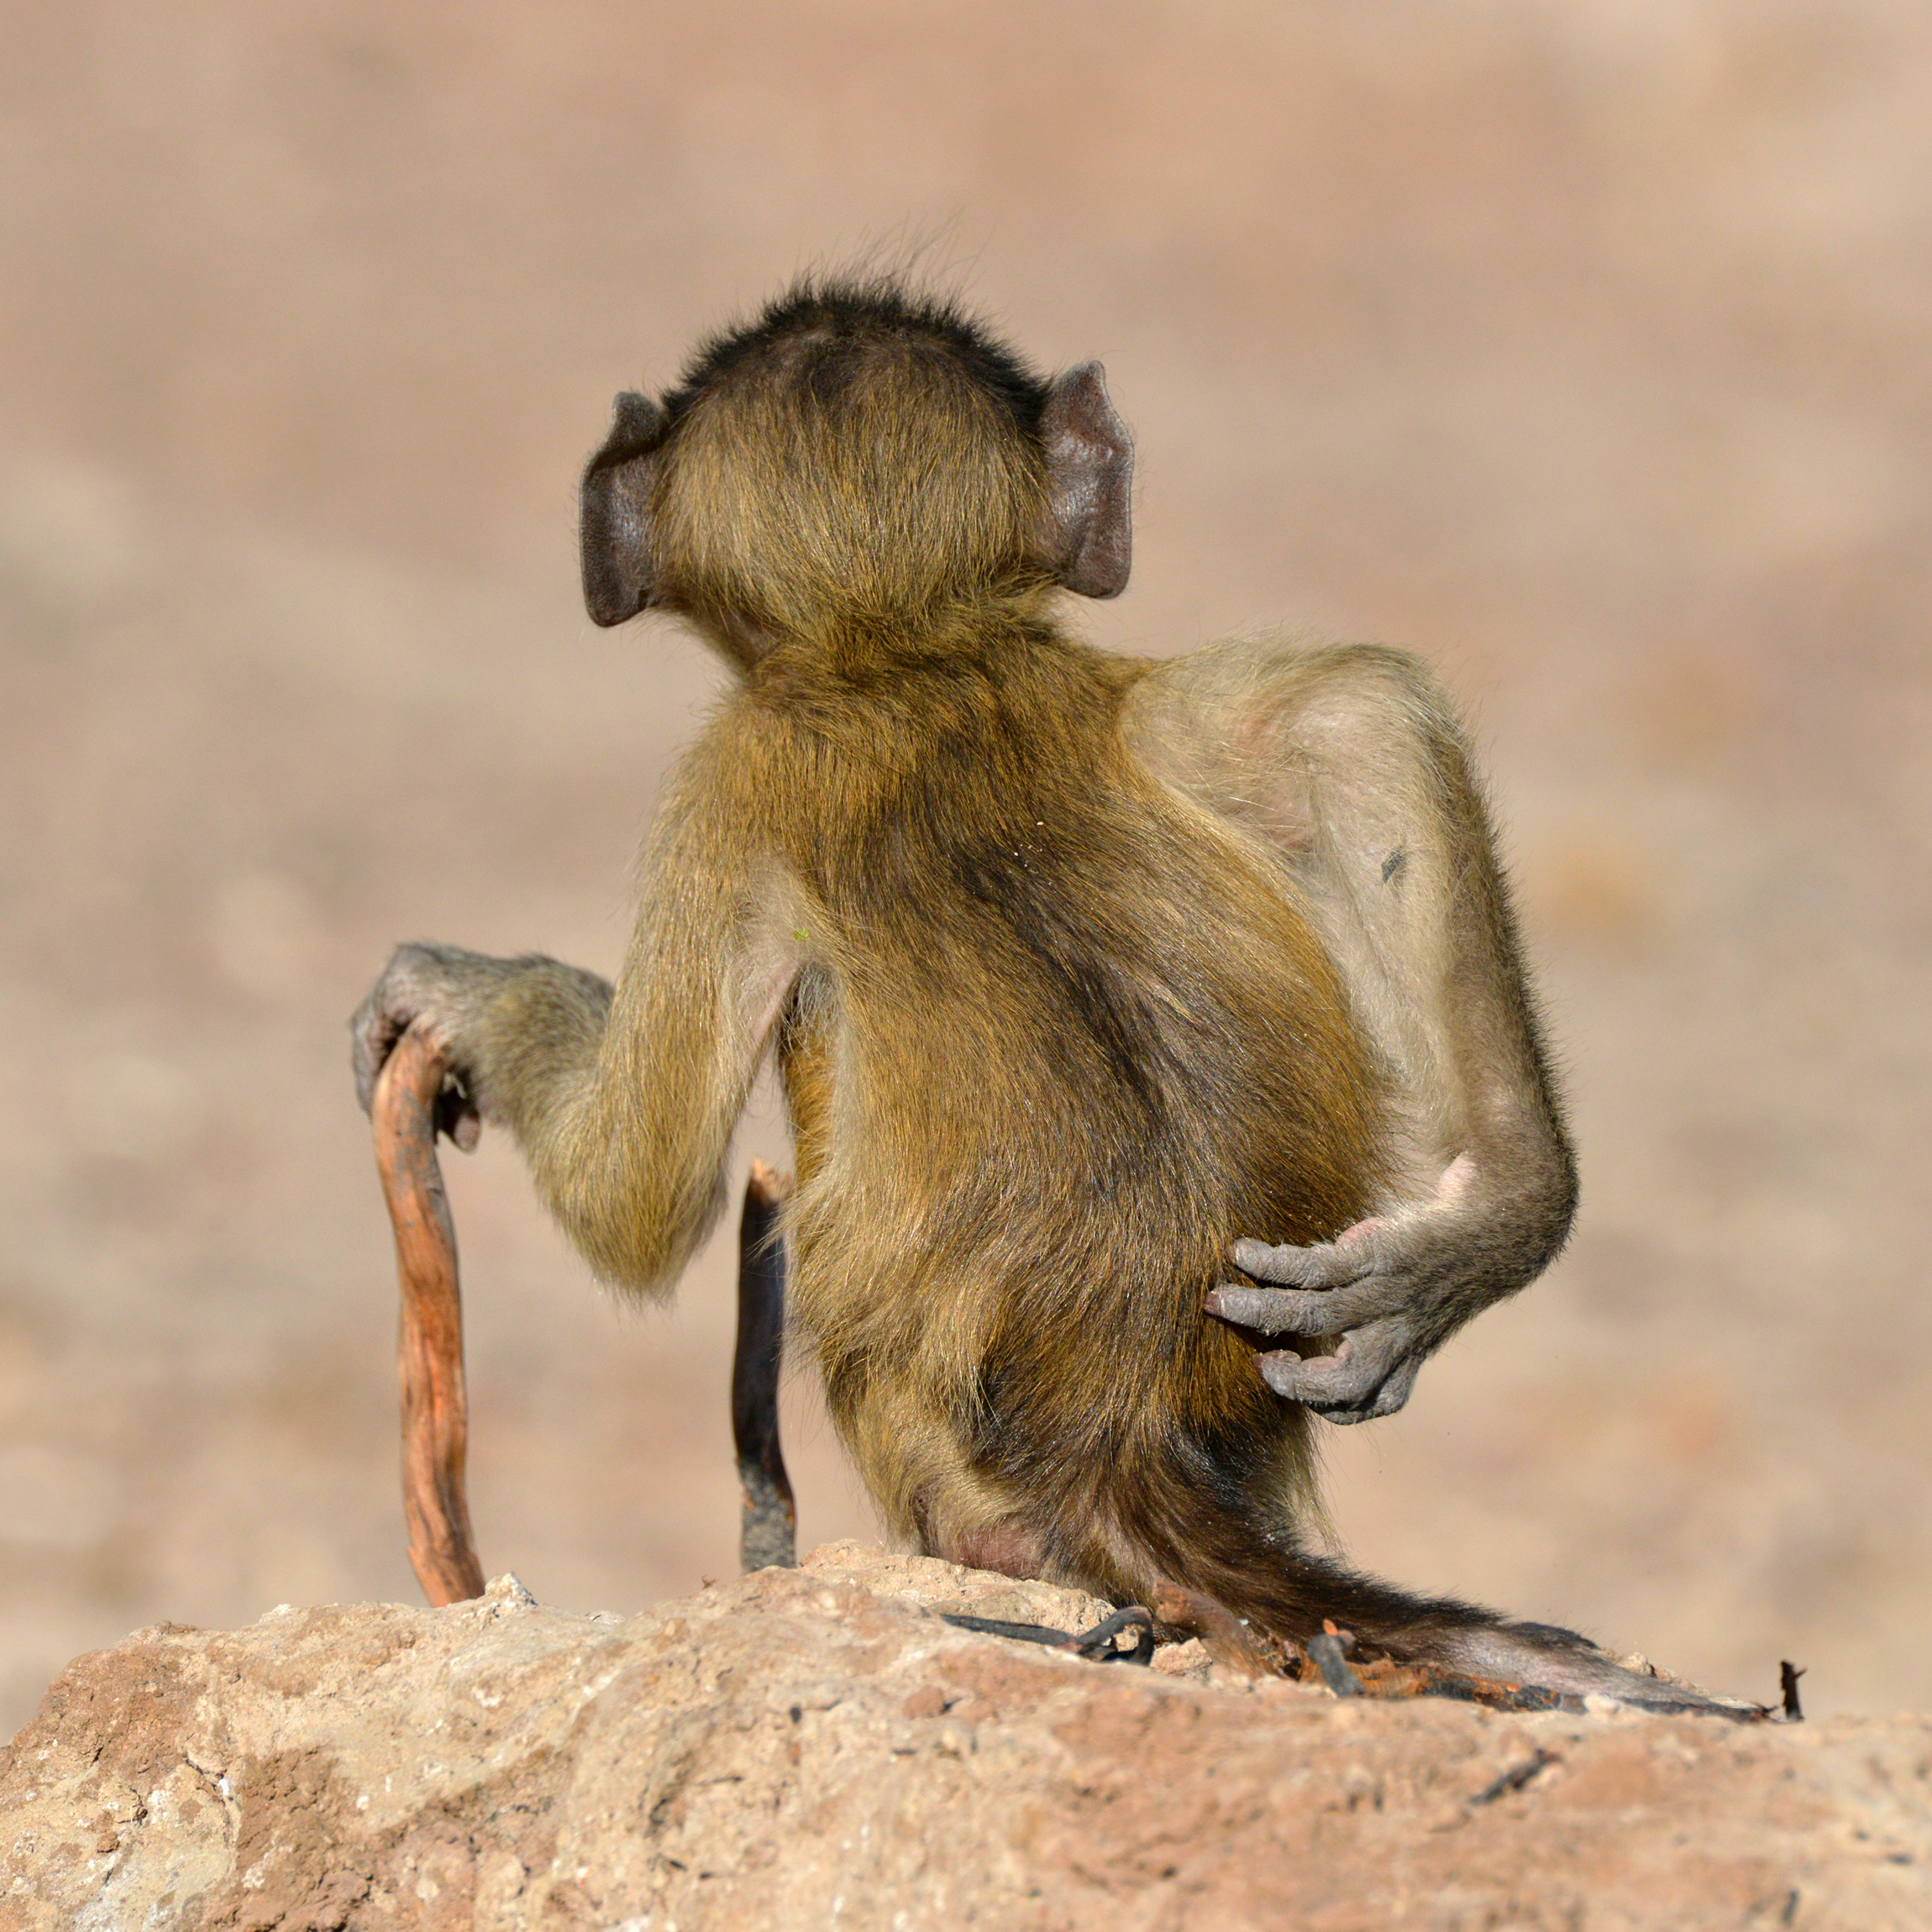 Martin Grace's Socially Uninhibited shows a baboon having a good old scratch (Martin Grace/The Comedy Wildlife Photography Awards 2020)